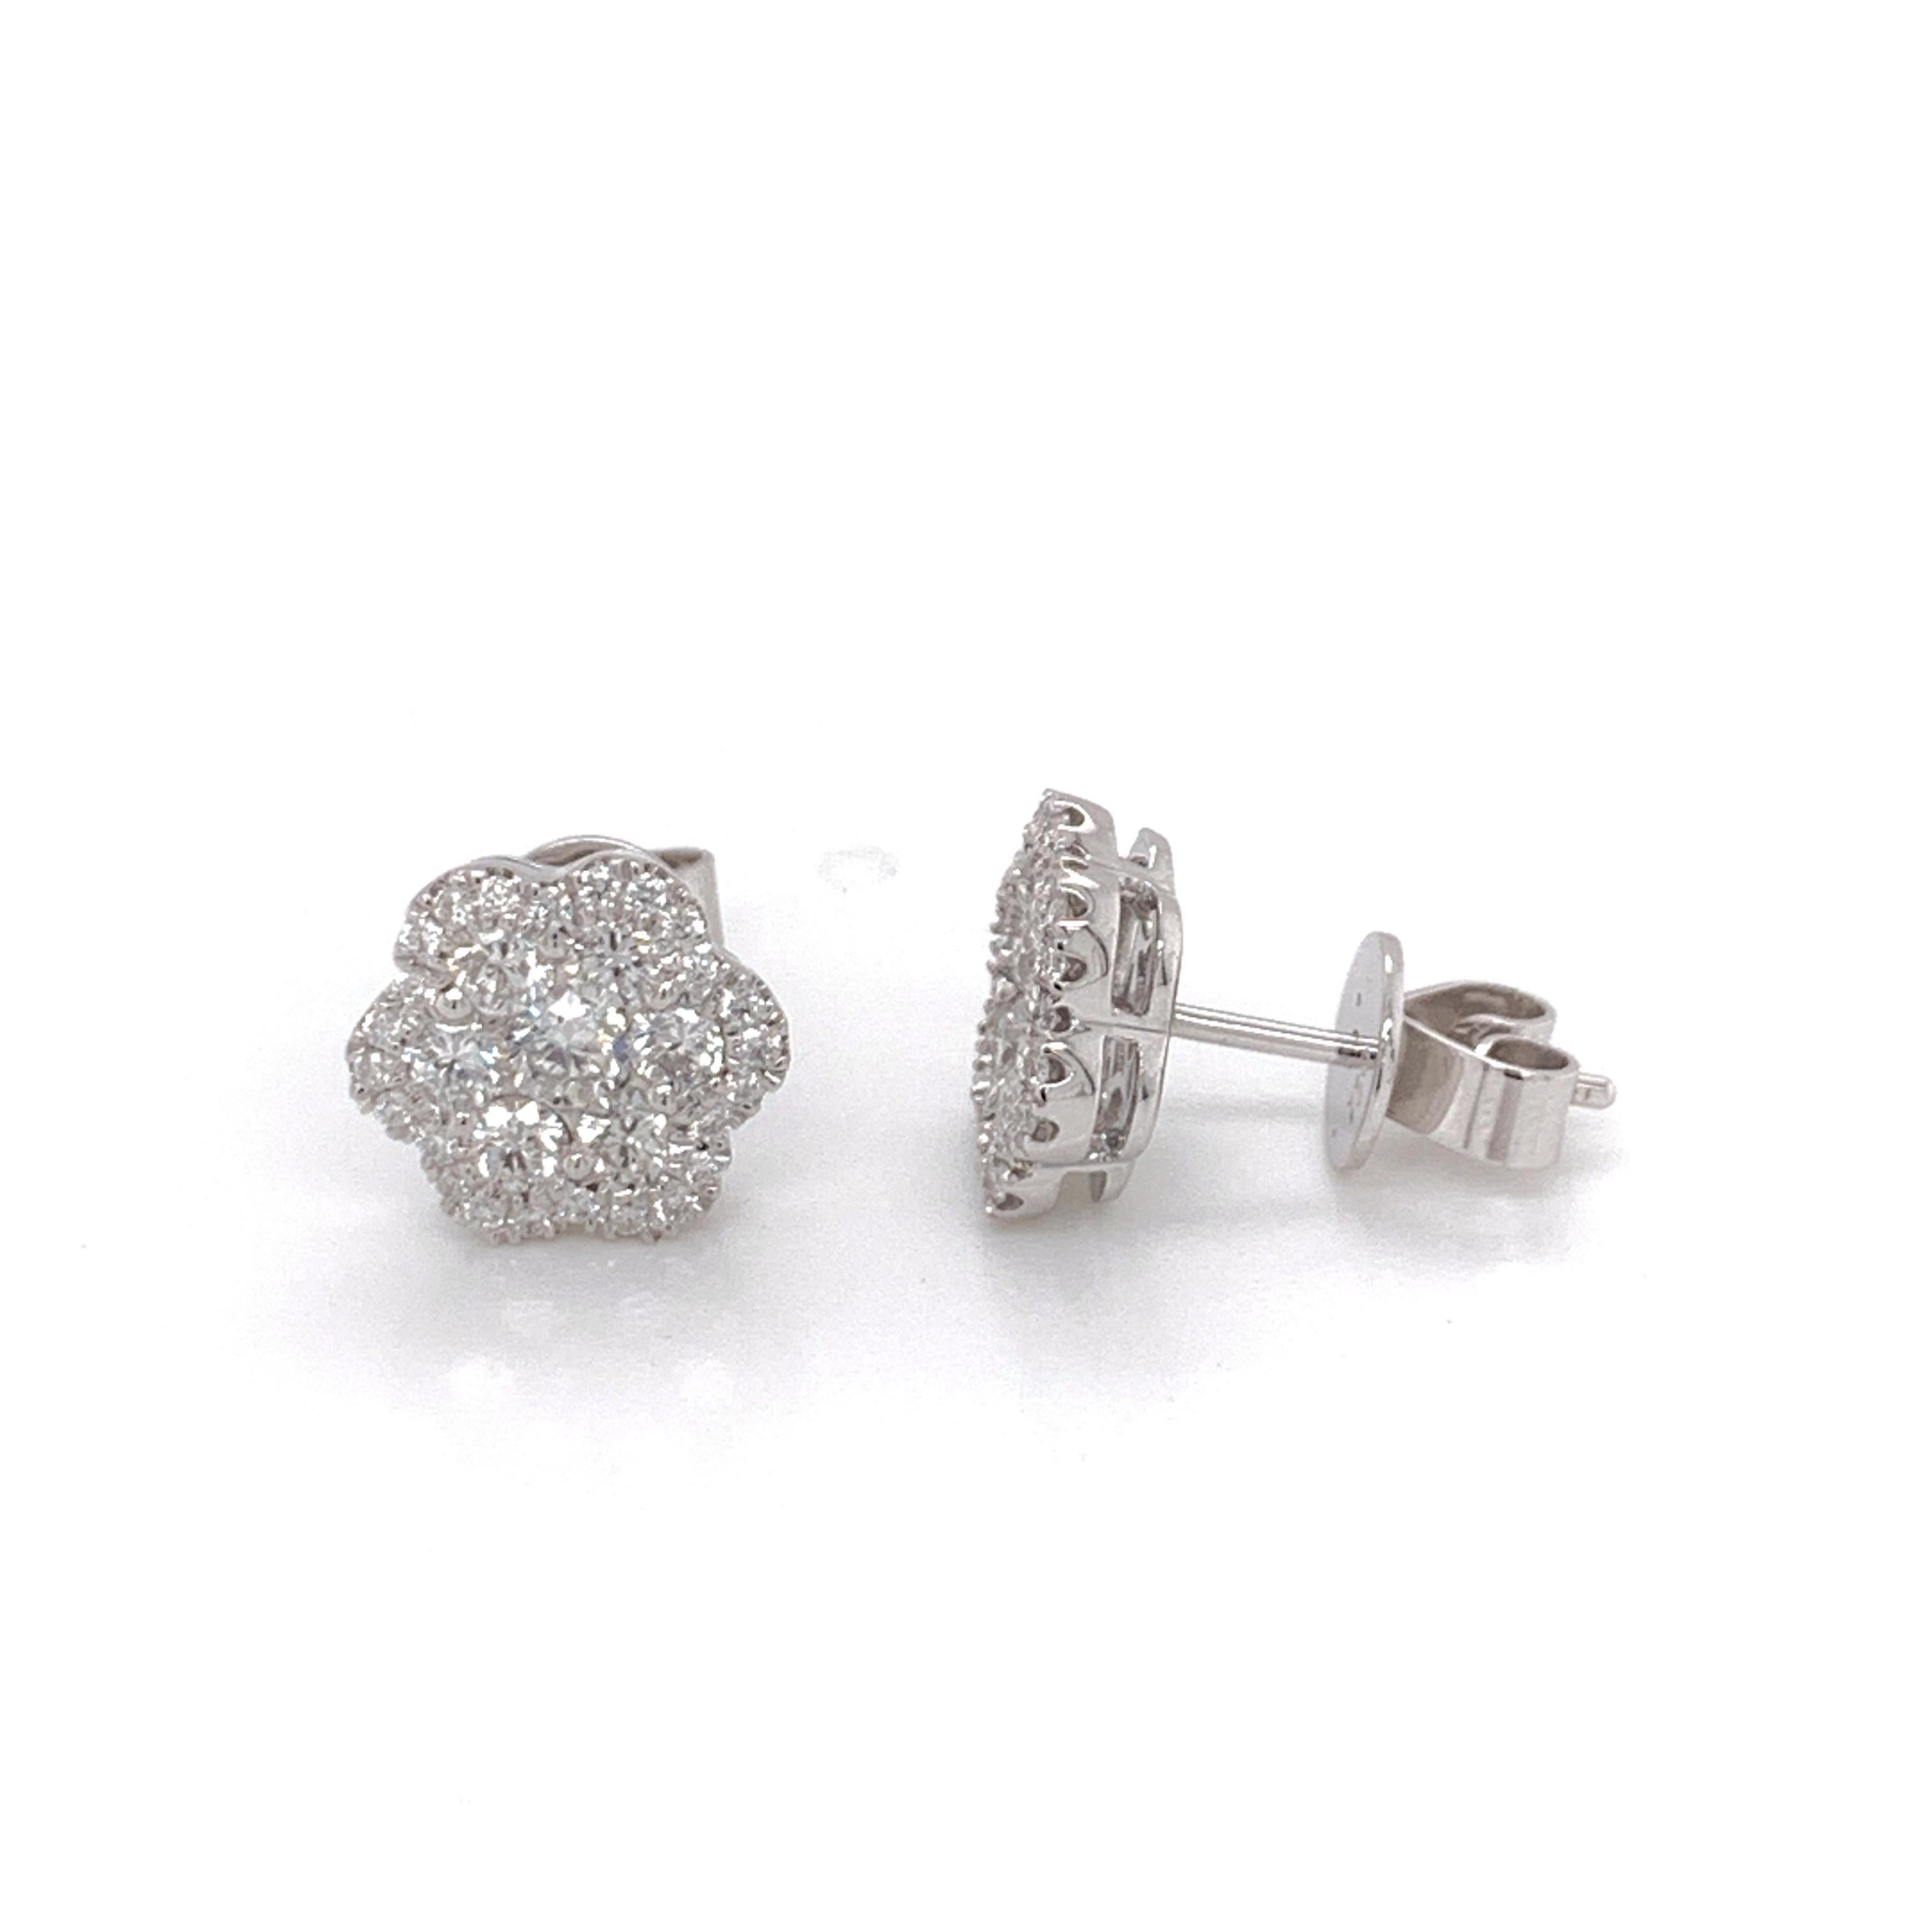 Diamond Flower Stud Earrings made with real/natural brilliant cut diamonds. Total Weight: 0.84 carats, Diamond Quantity: 62 round diamonds. Color/Clarity: H1. Set on 18 karat white gold, push back setting.